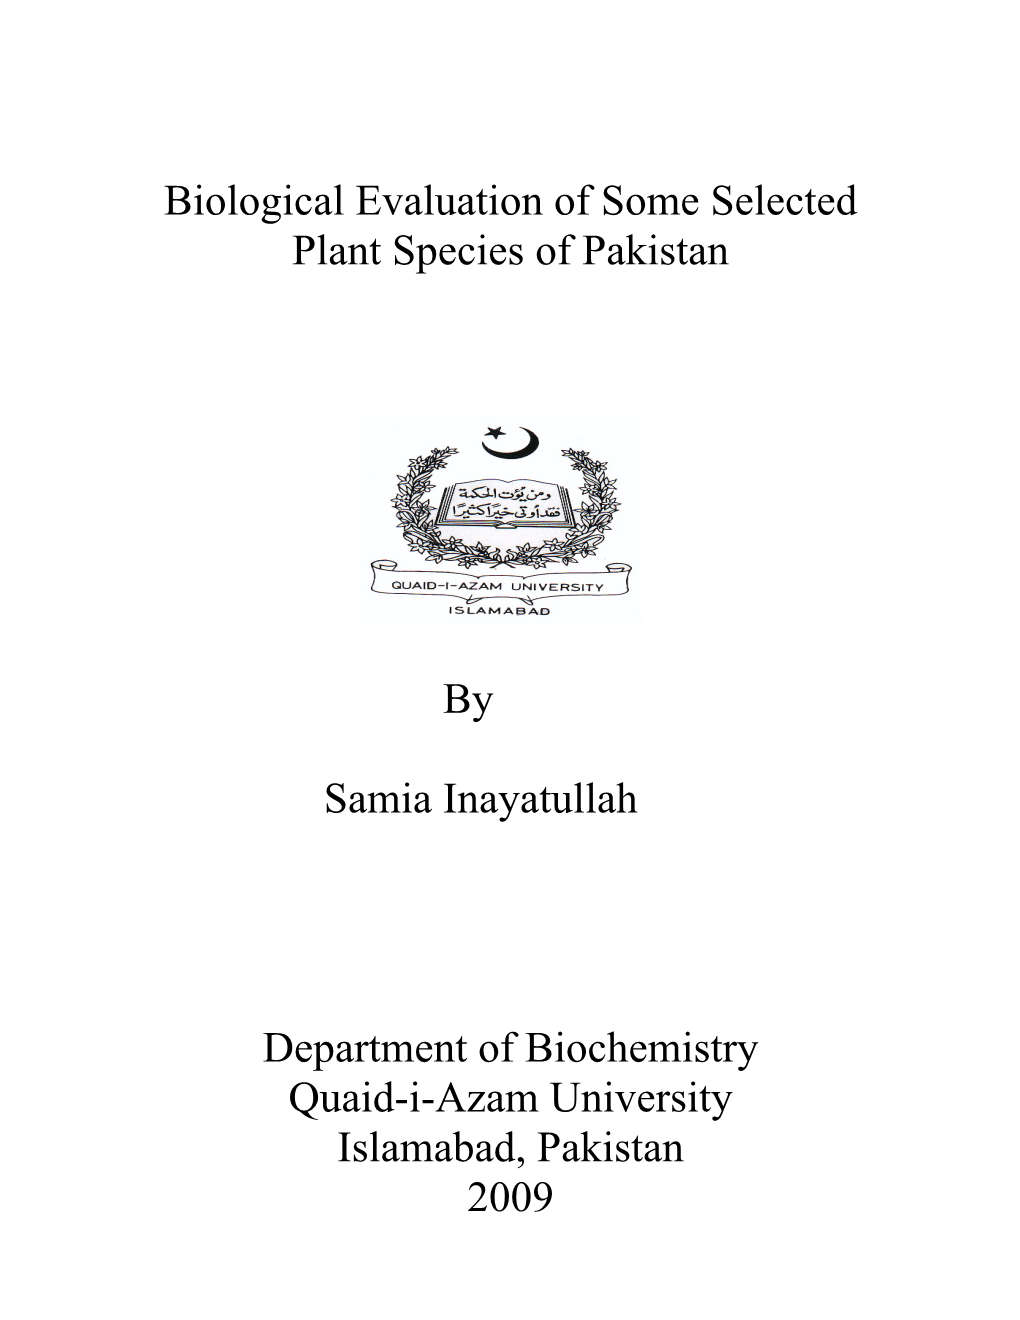 Biological Evaluation of Some Selected Plant Species of Pakistan